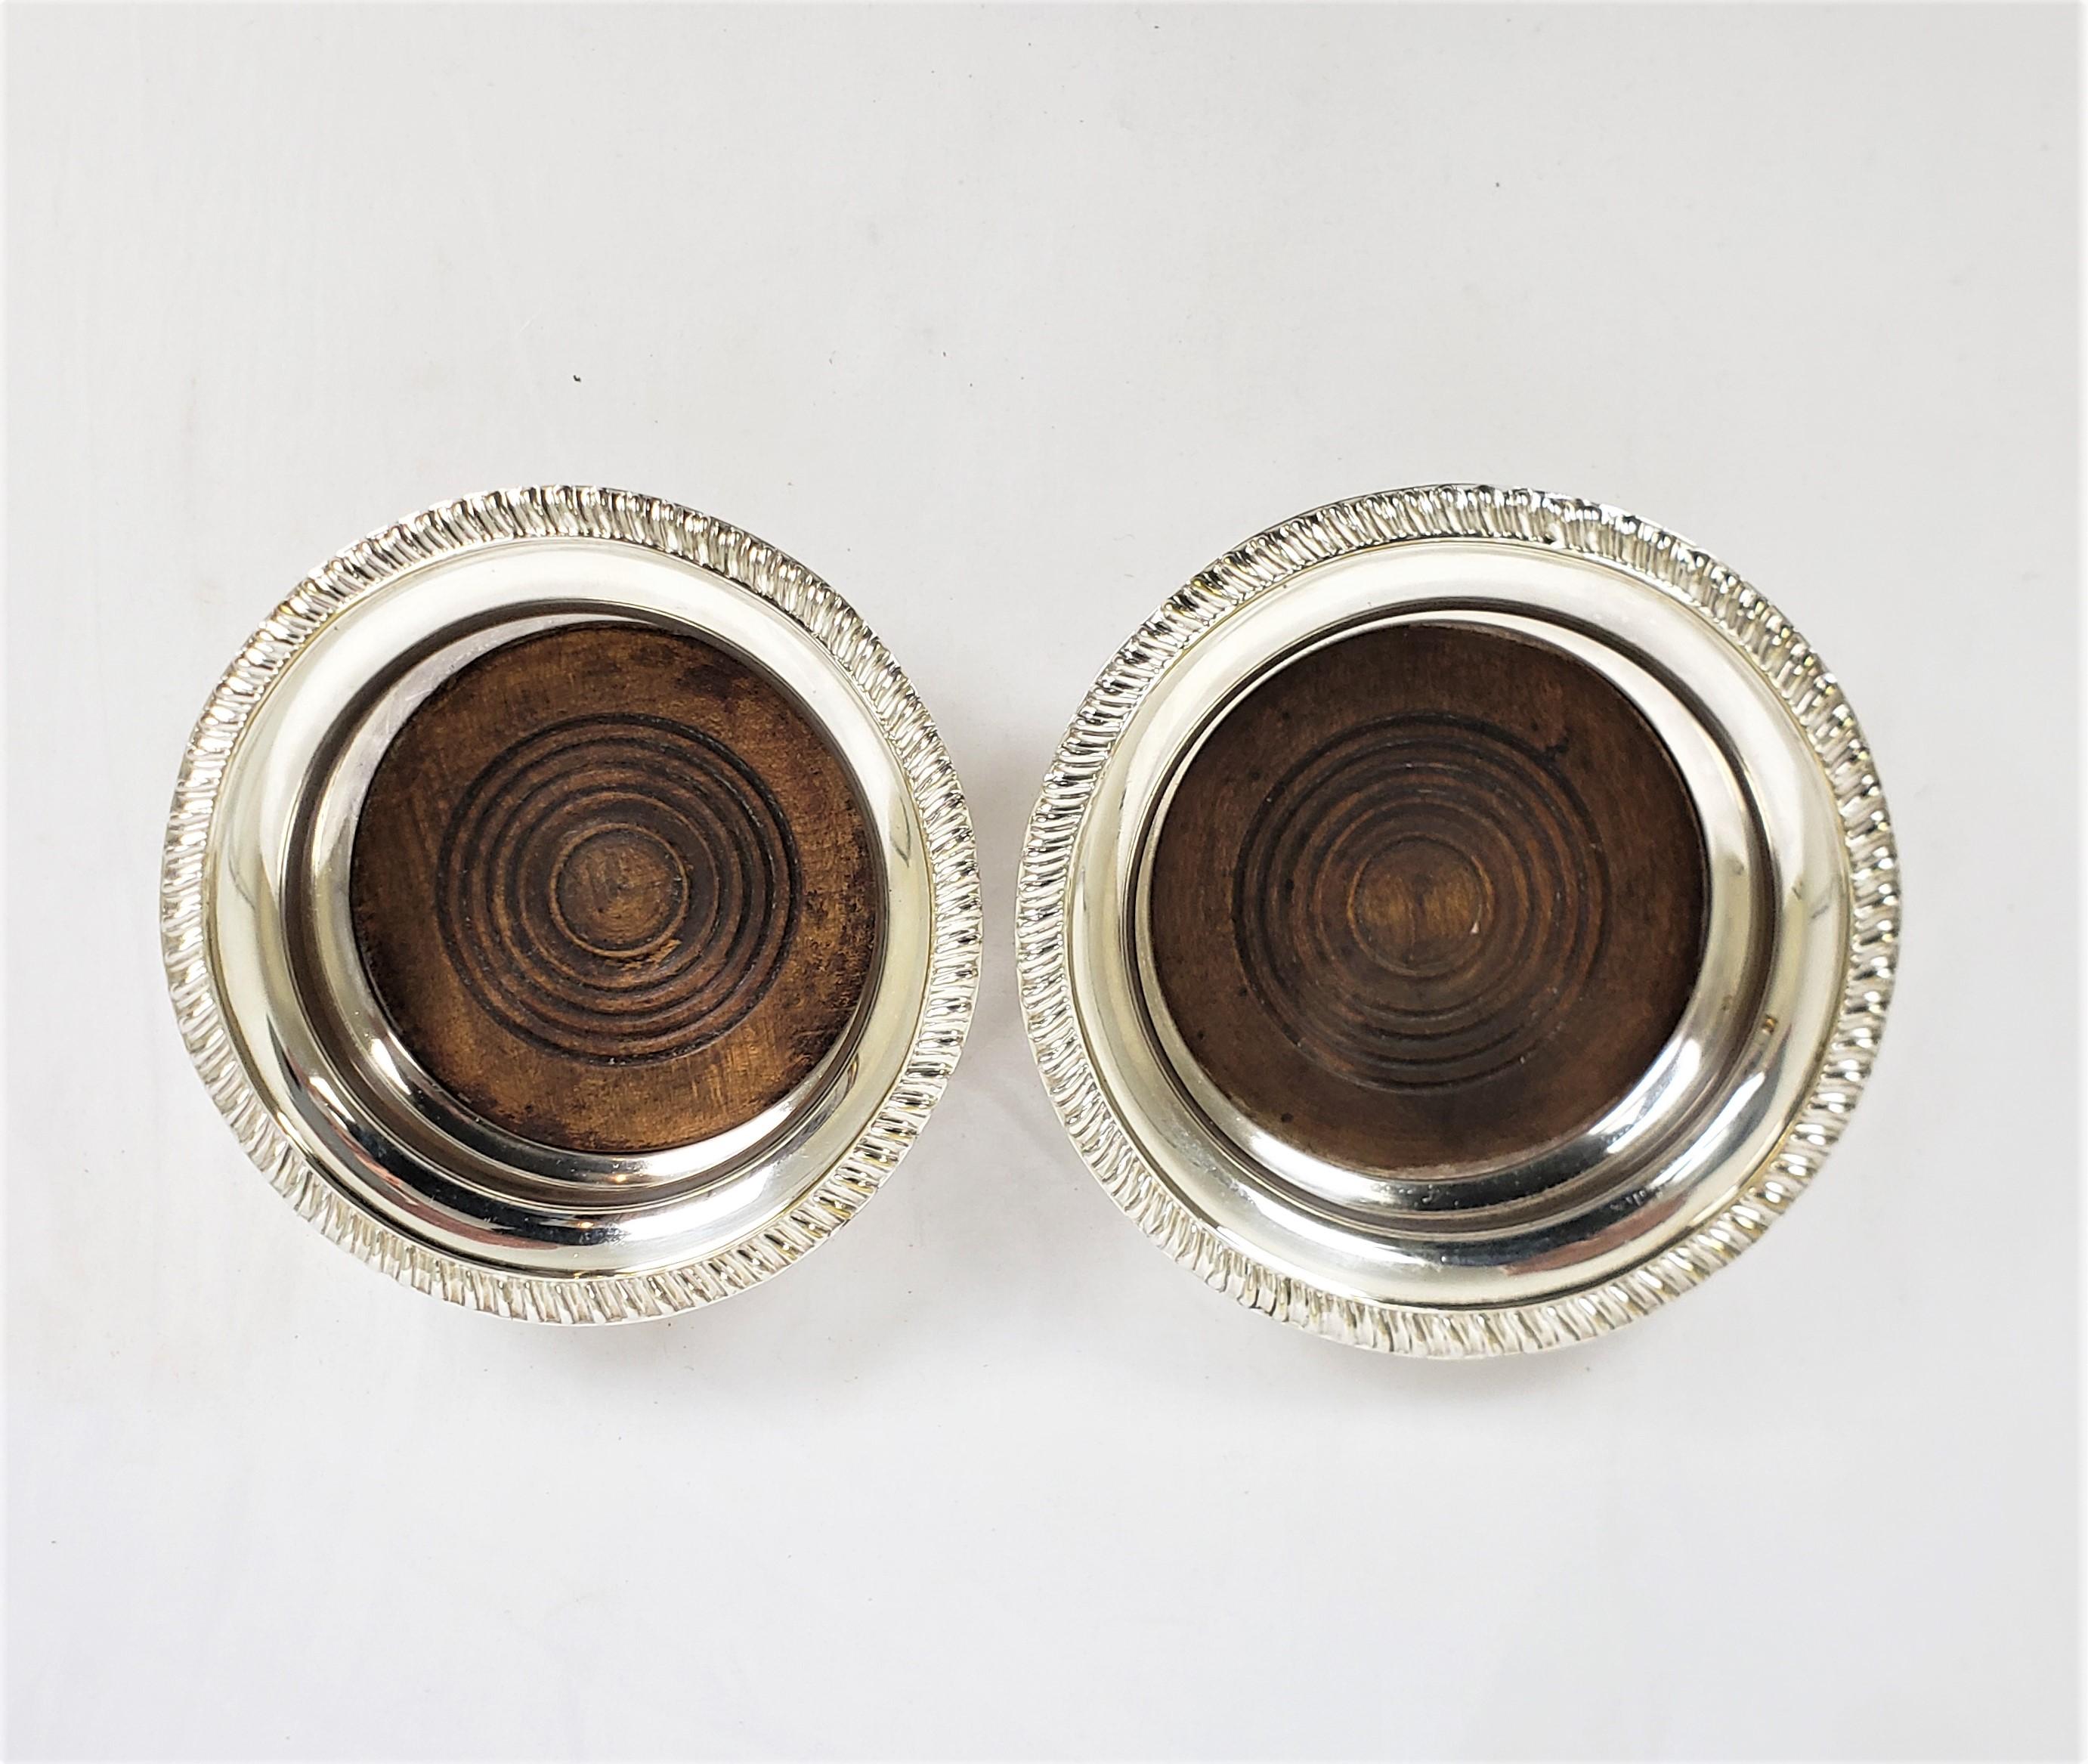 Pair of Antique English Silver Plated Bottle Coasters with Turned Wooden Inserts For Sale 1